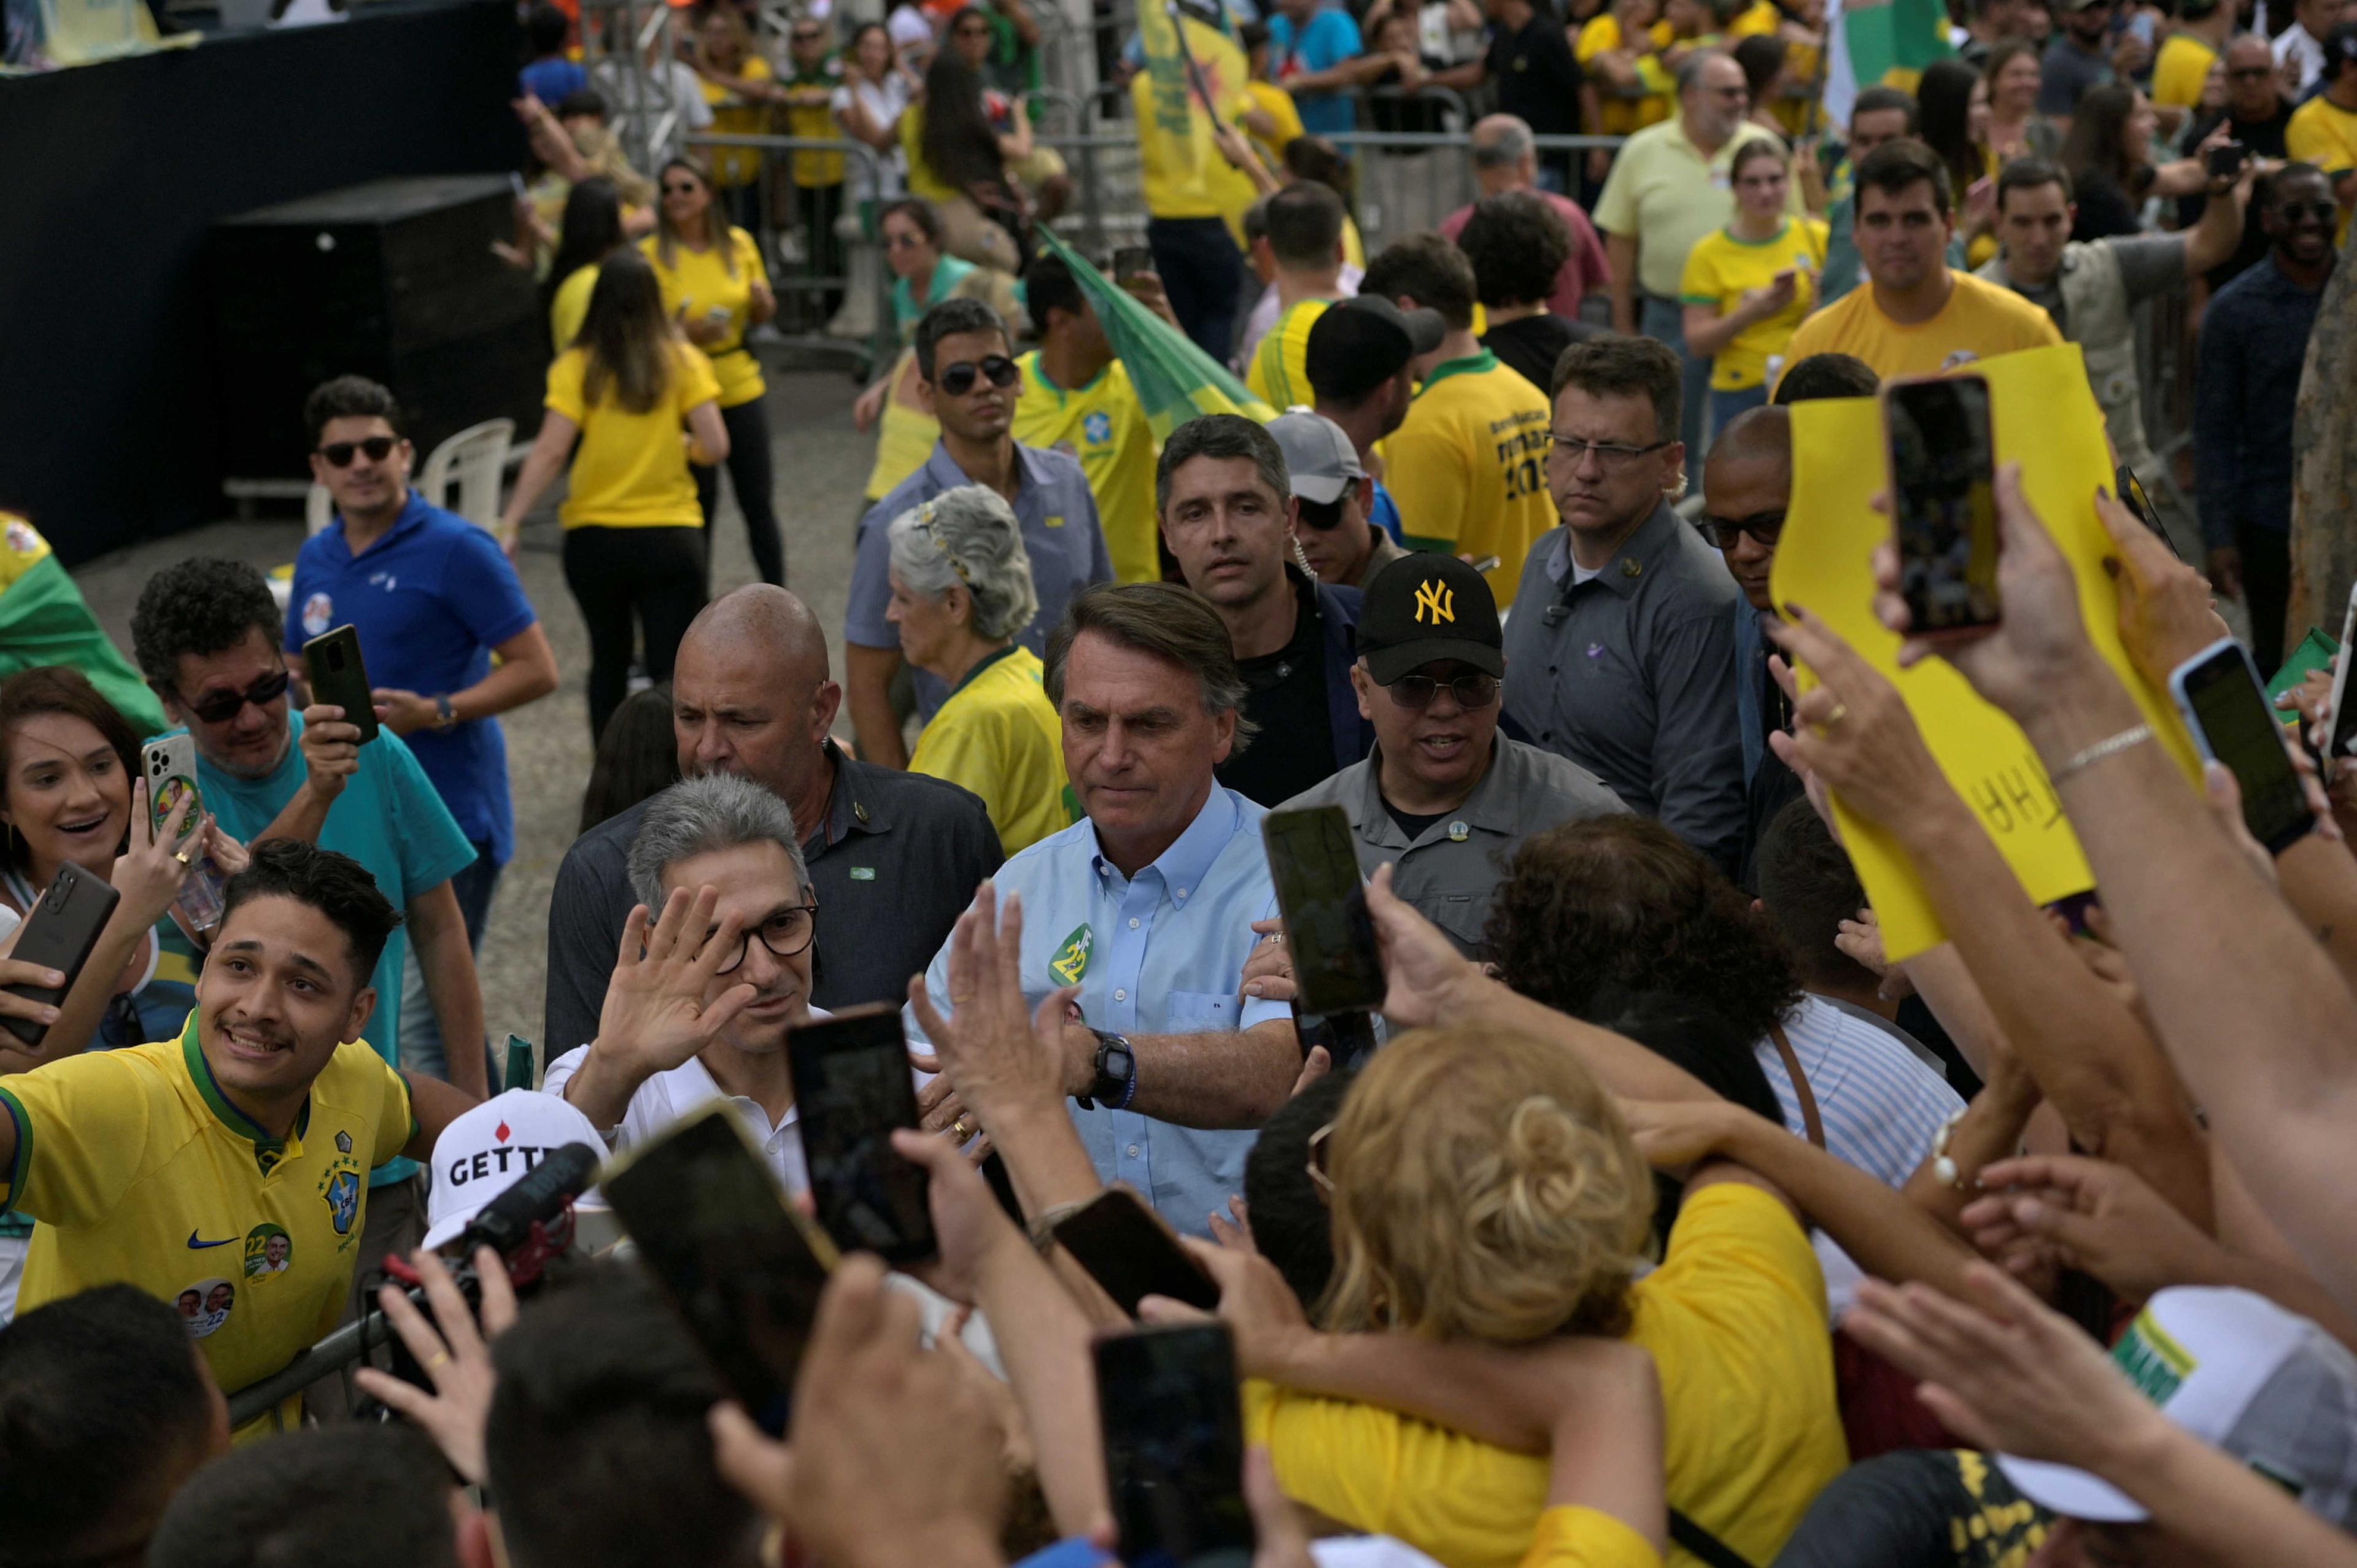 Brazil's President and candidate for re-election Jair Bolsonaro attends a campaign rally in Juiz de Fora in Minas Gerais state, Brazil Oct 18. Photo: Reuters